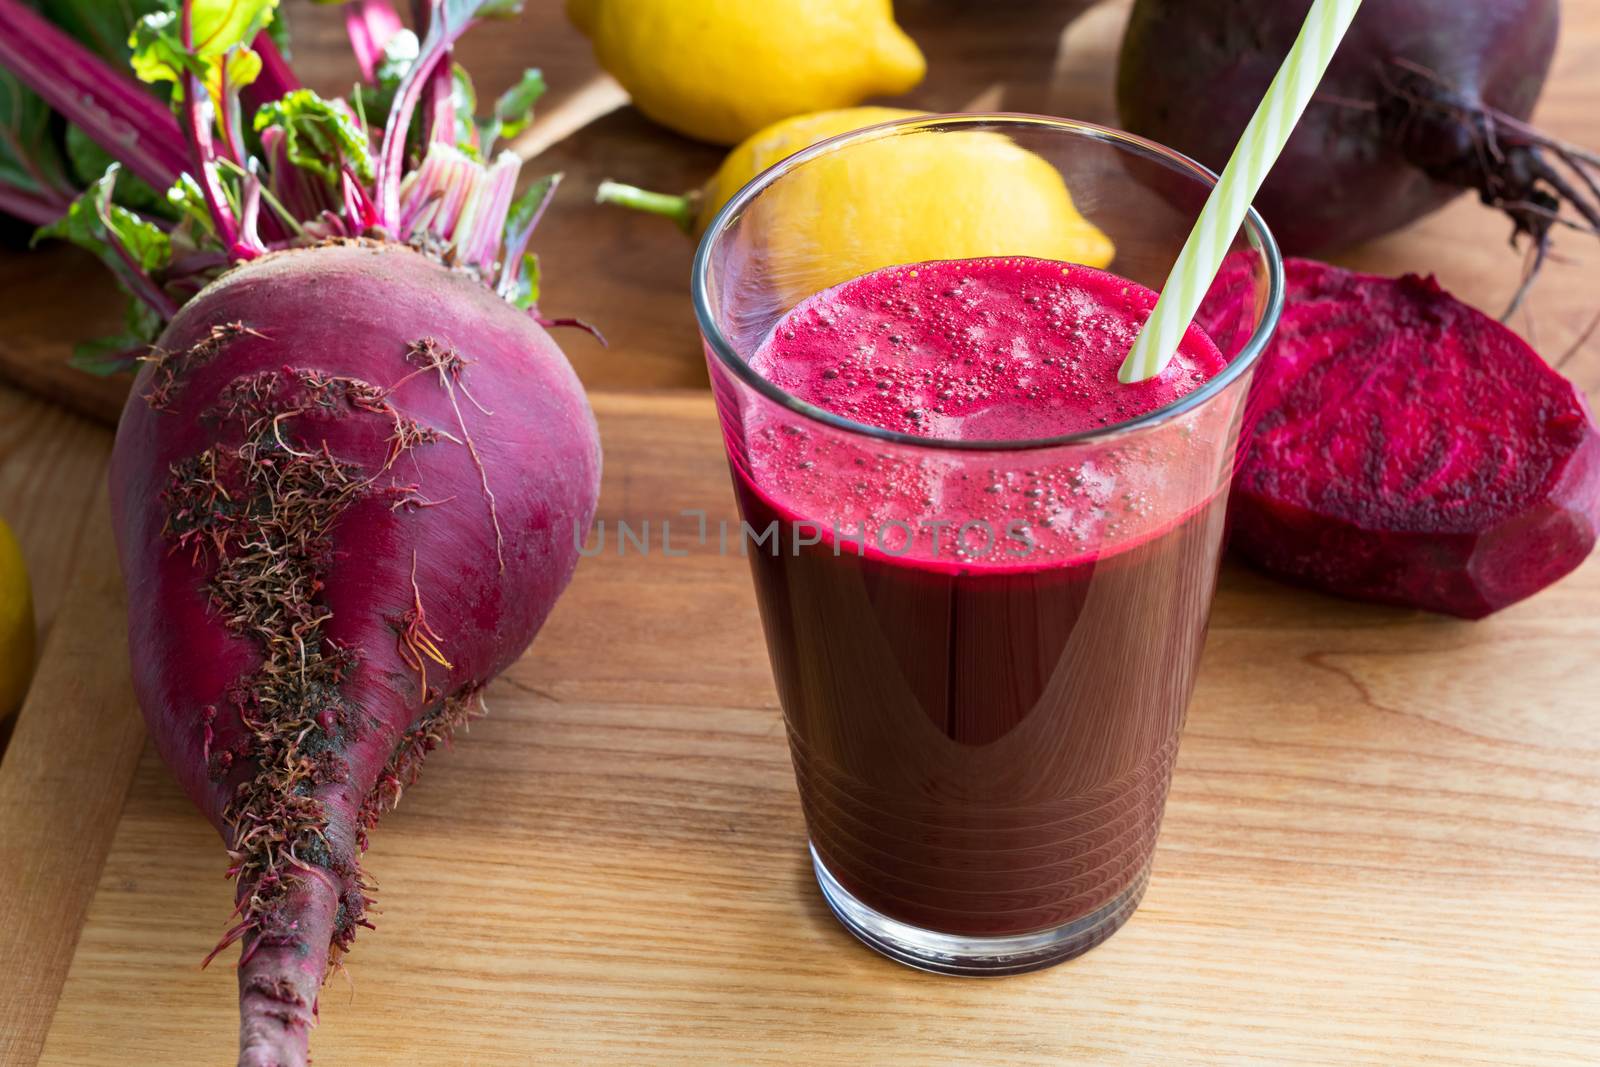 Red beet juice in a glass on a wooden background with lemon and whole beets